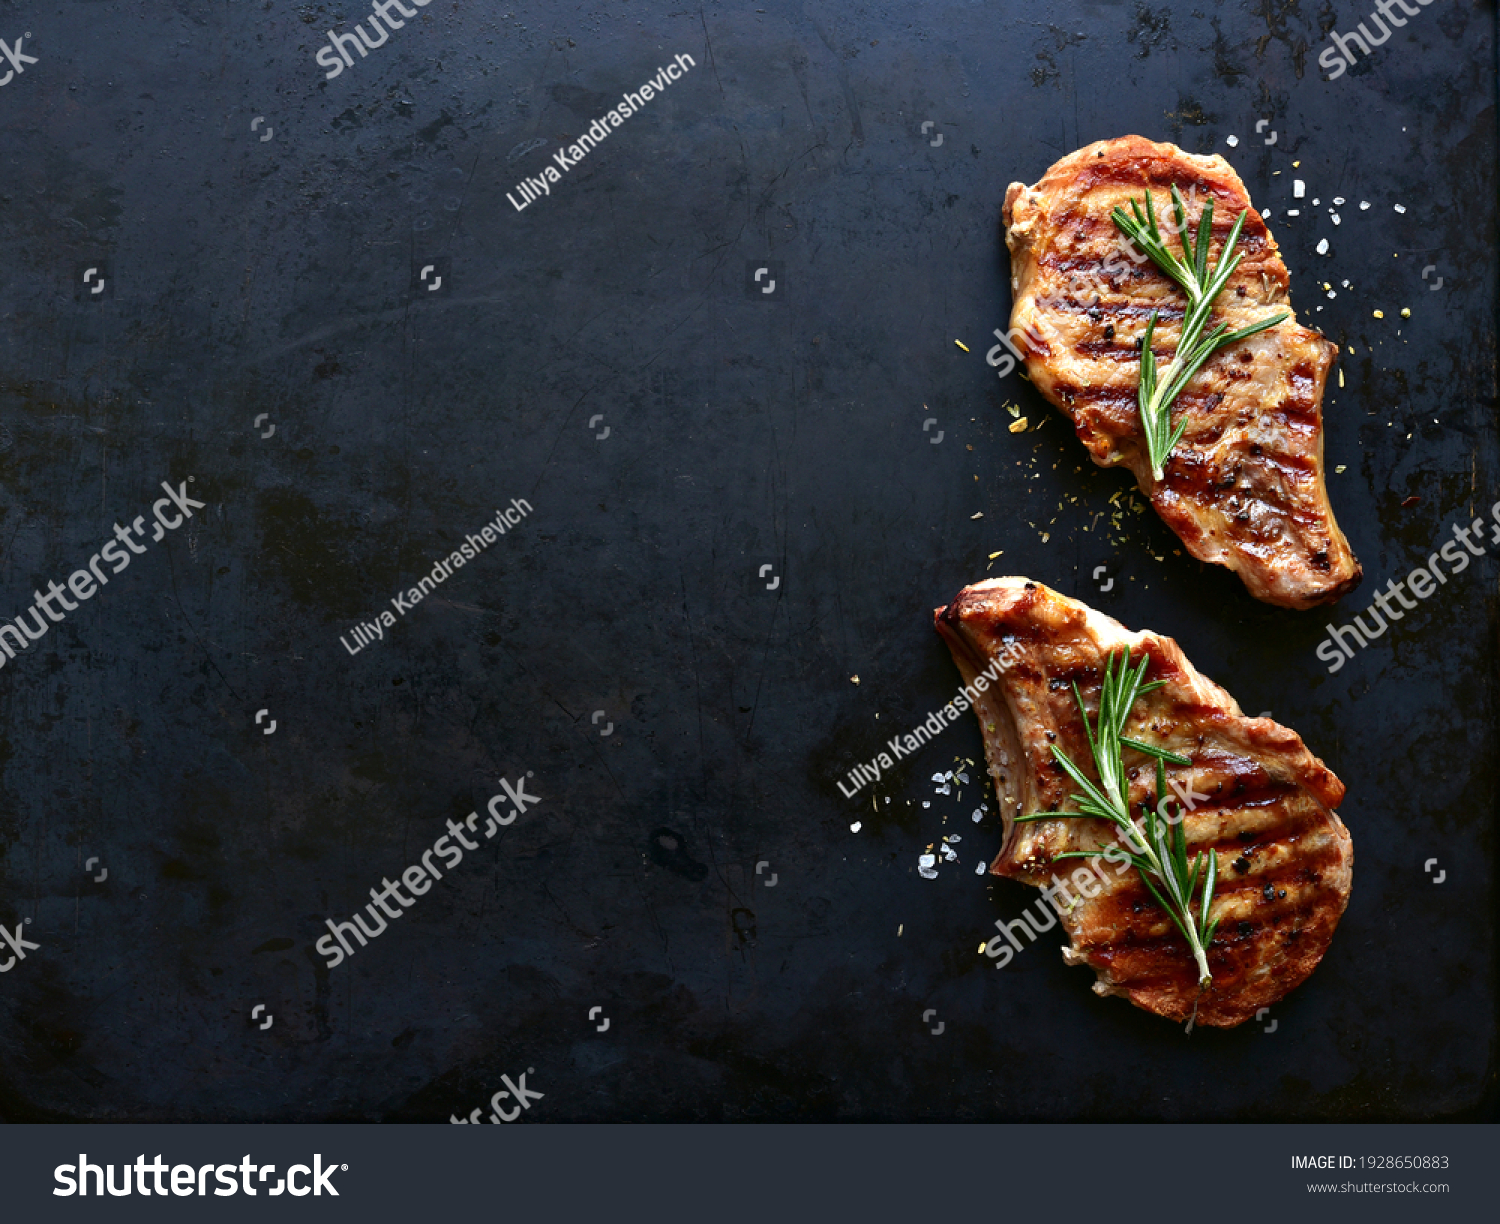 Grilled pork loin on a bone on a black metal background. Top view with copy space. #1928650883